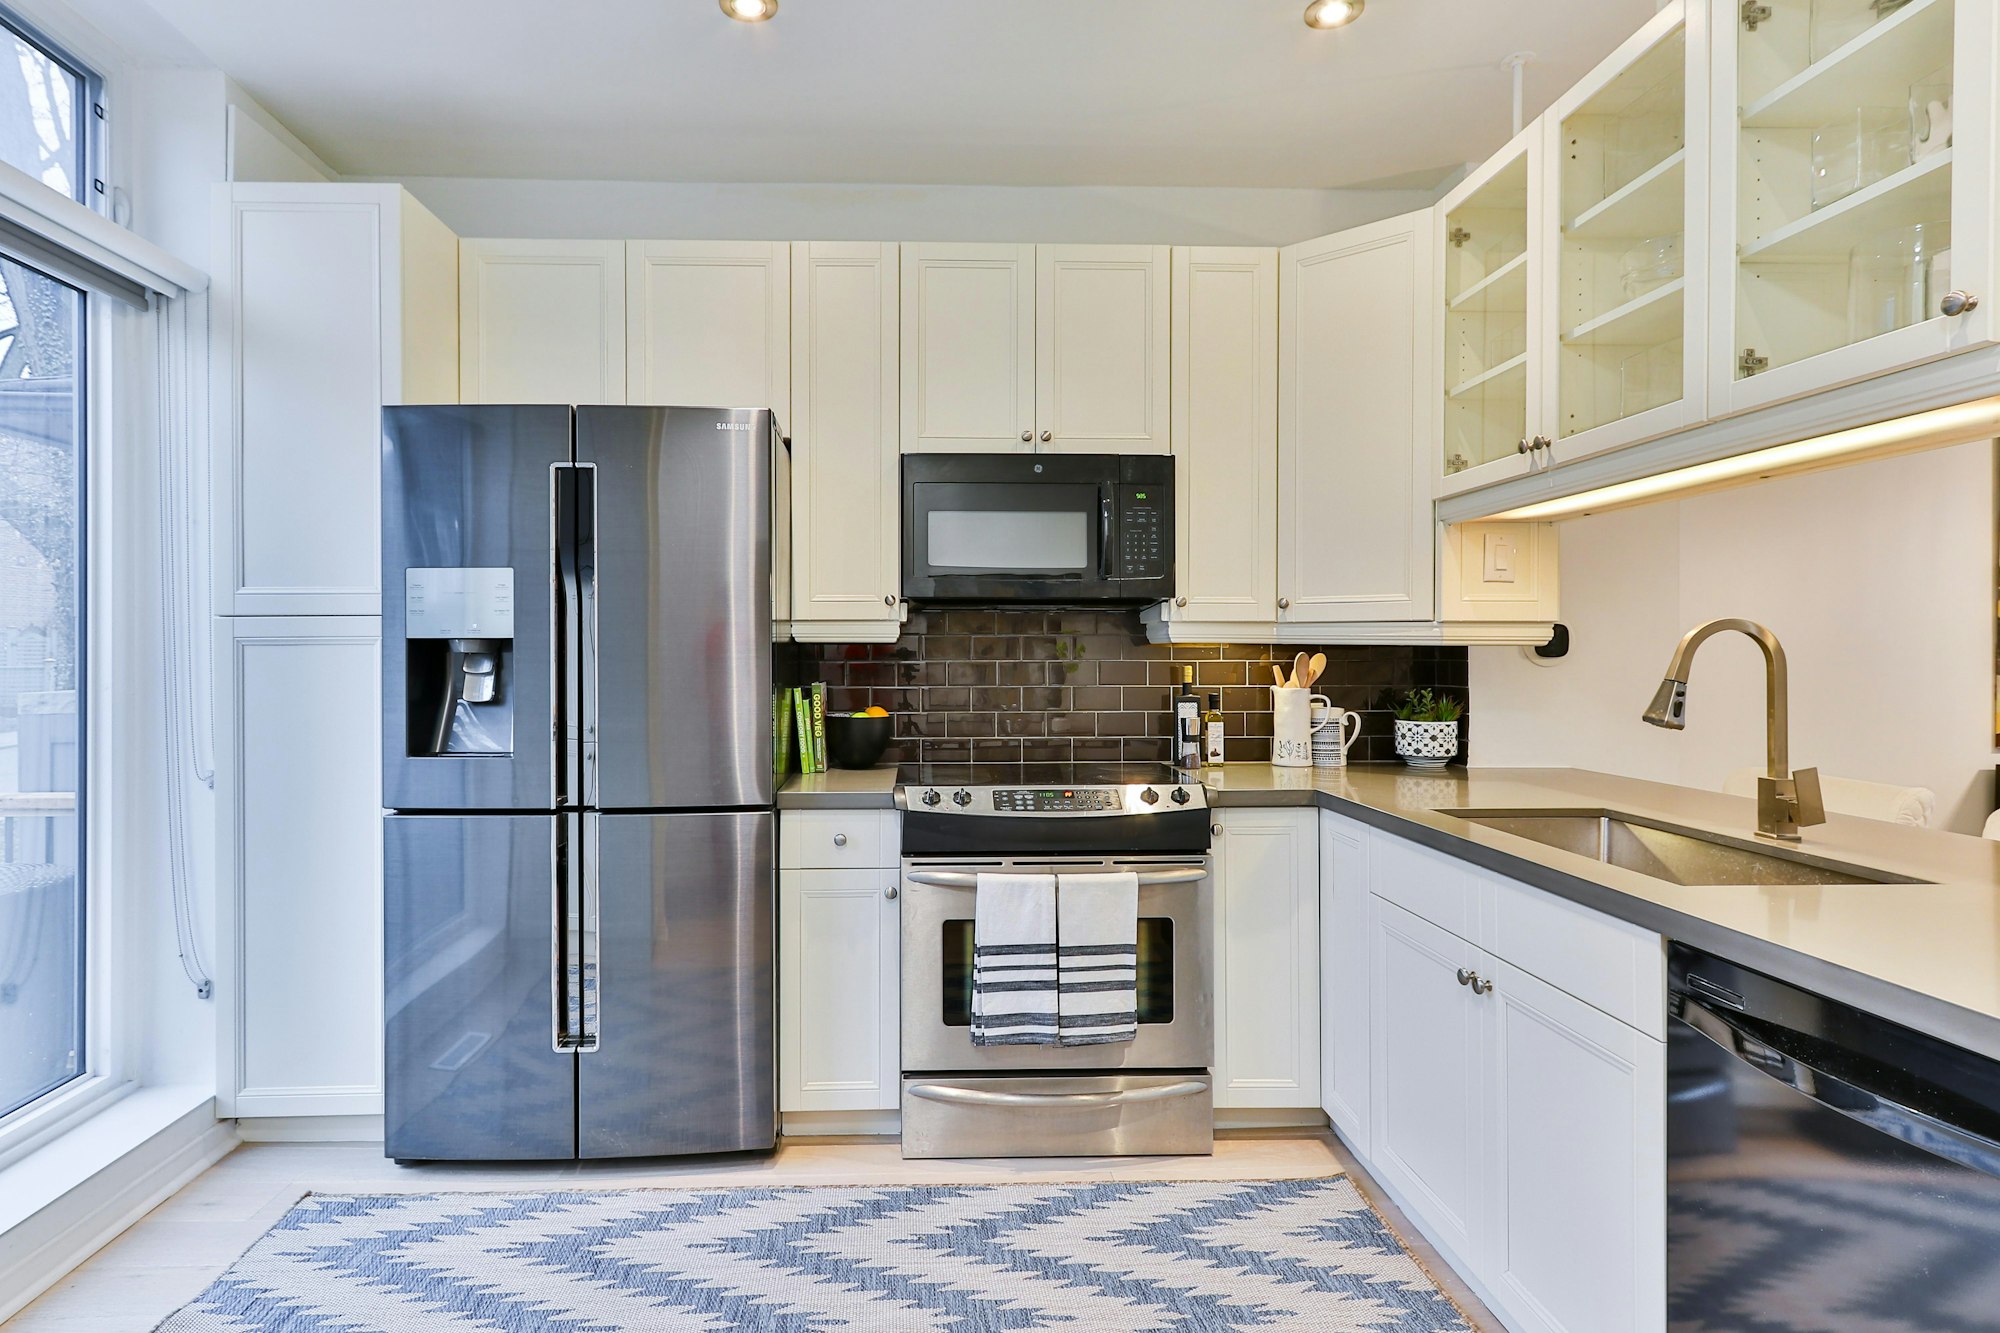 The view of a kitchen showcases stainless steel appliances and white cabinets.